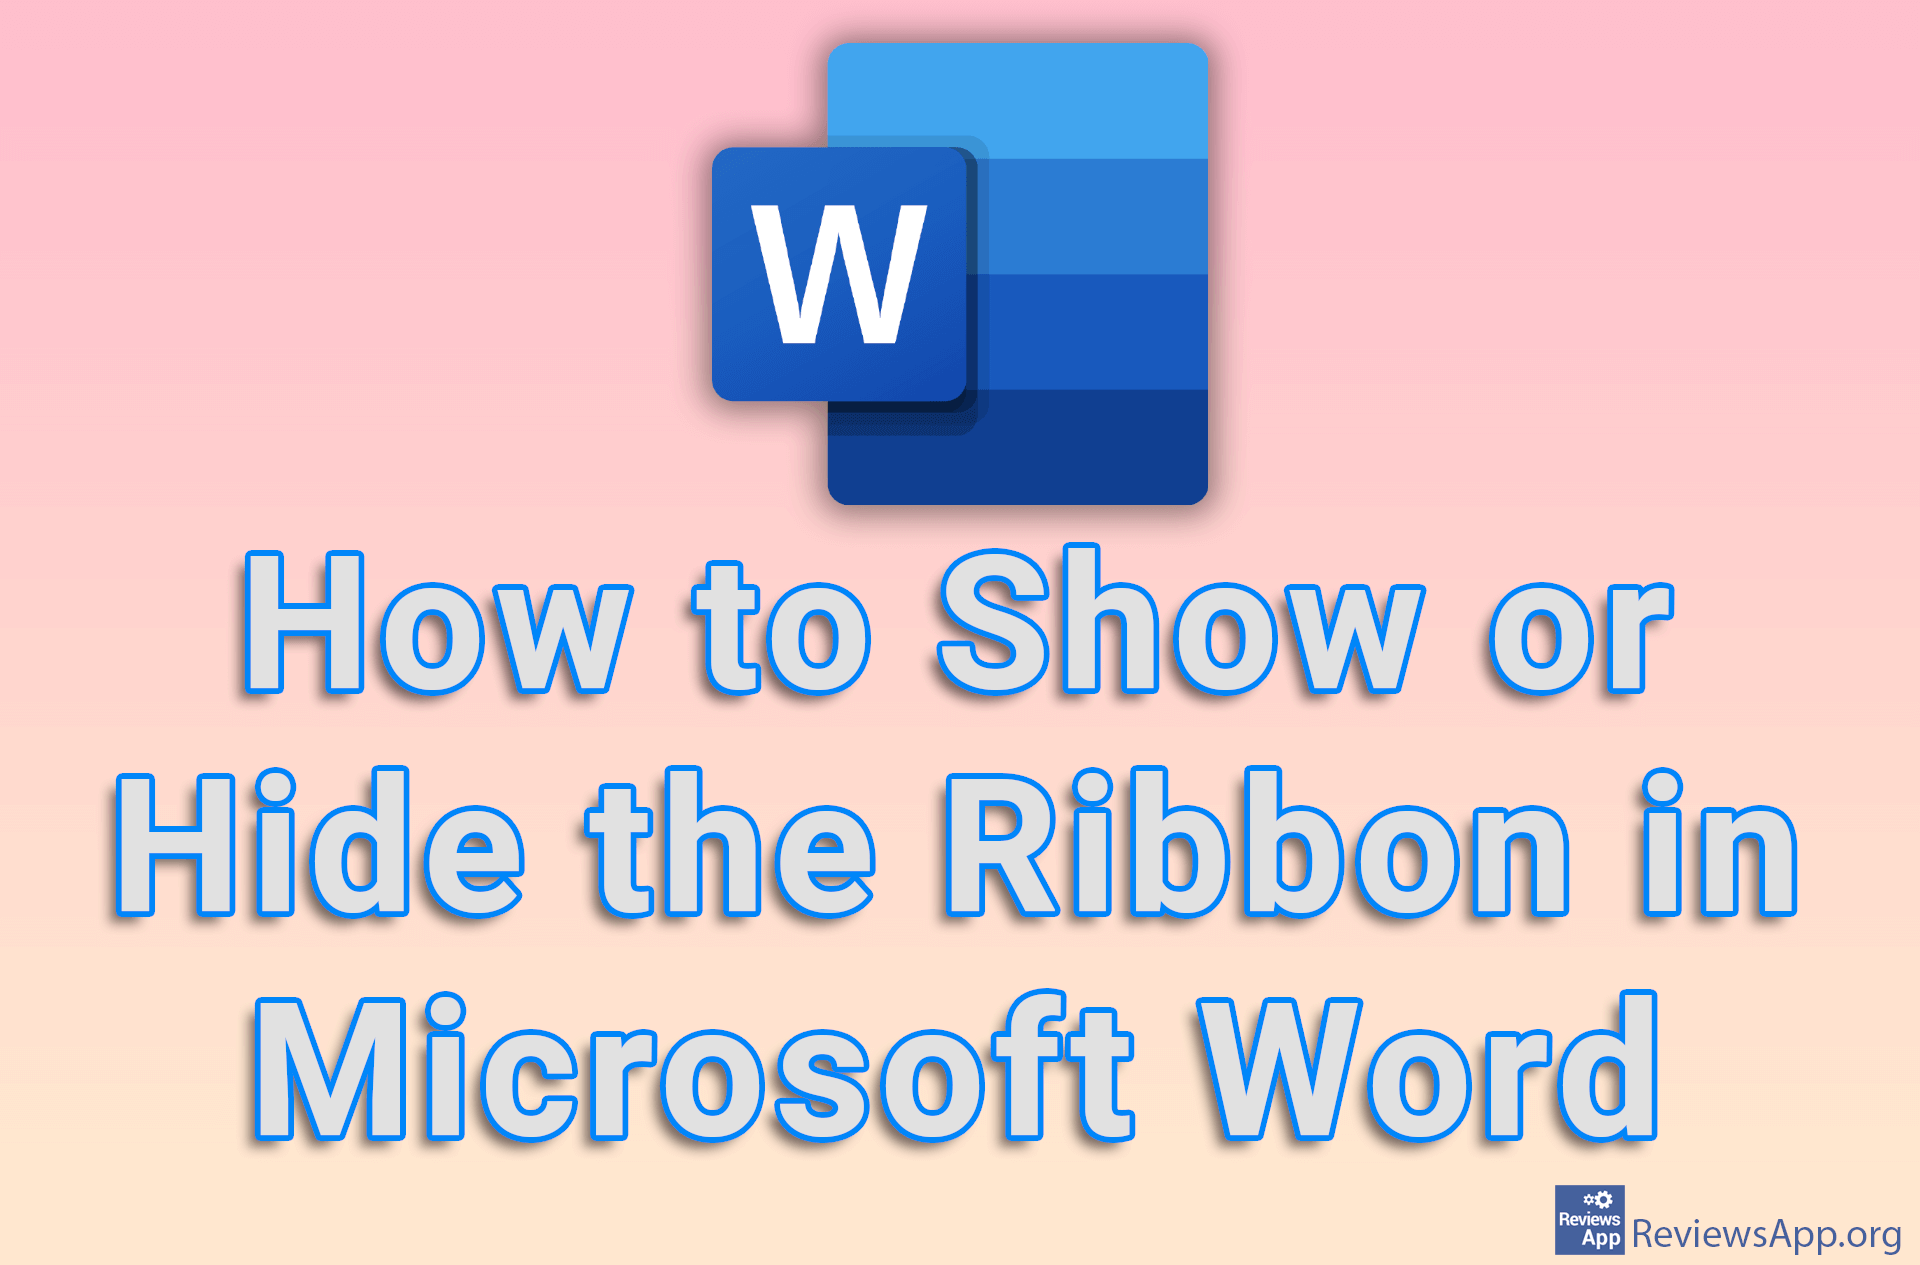 How to Show or Hide the Ribbon in Microsoft Word